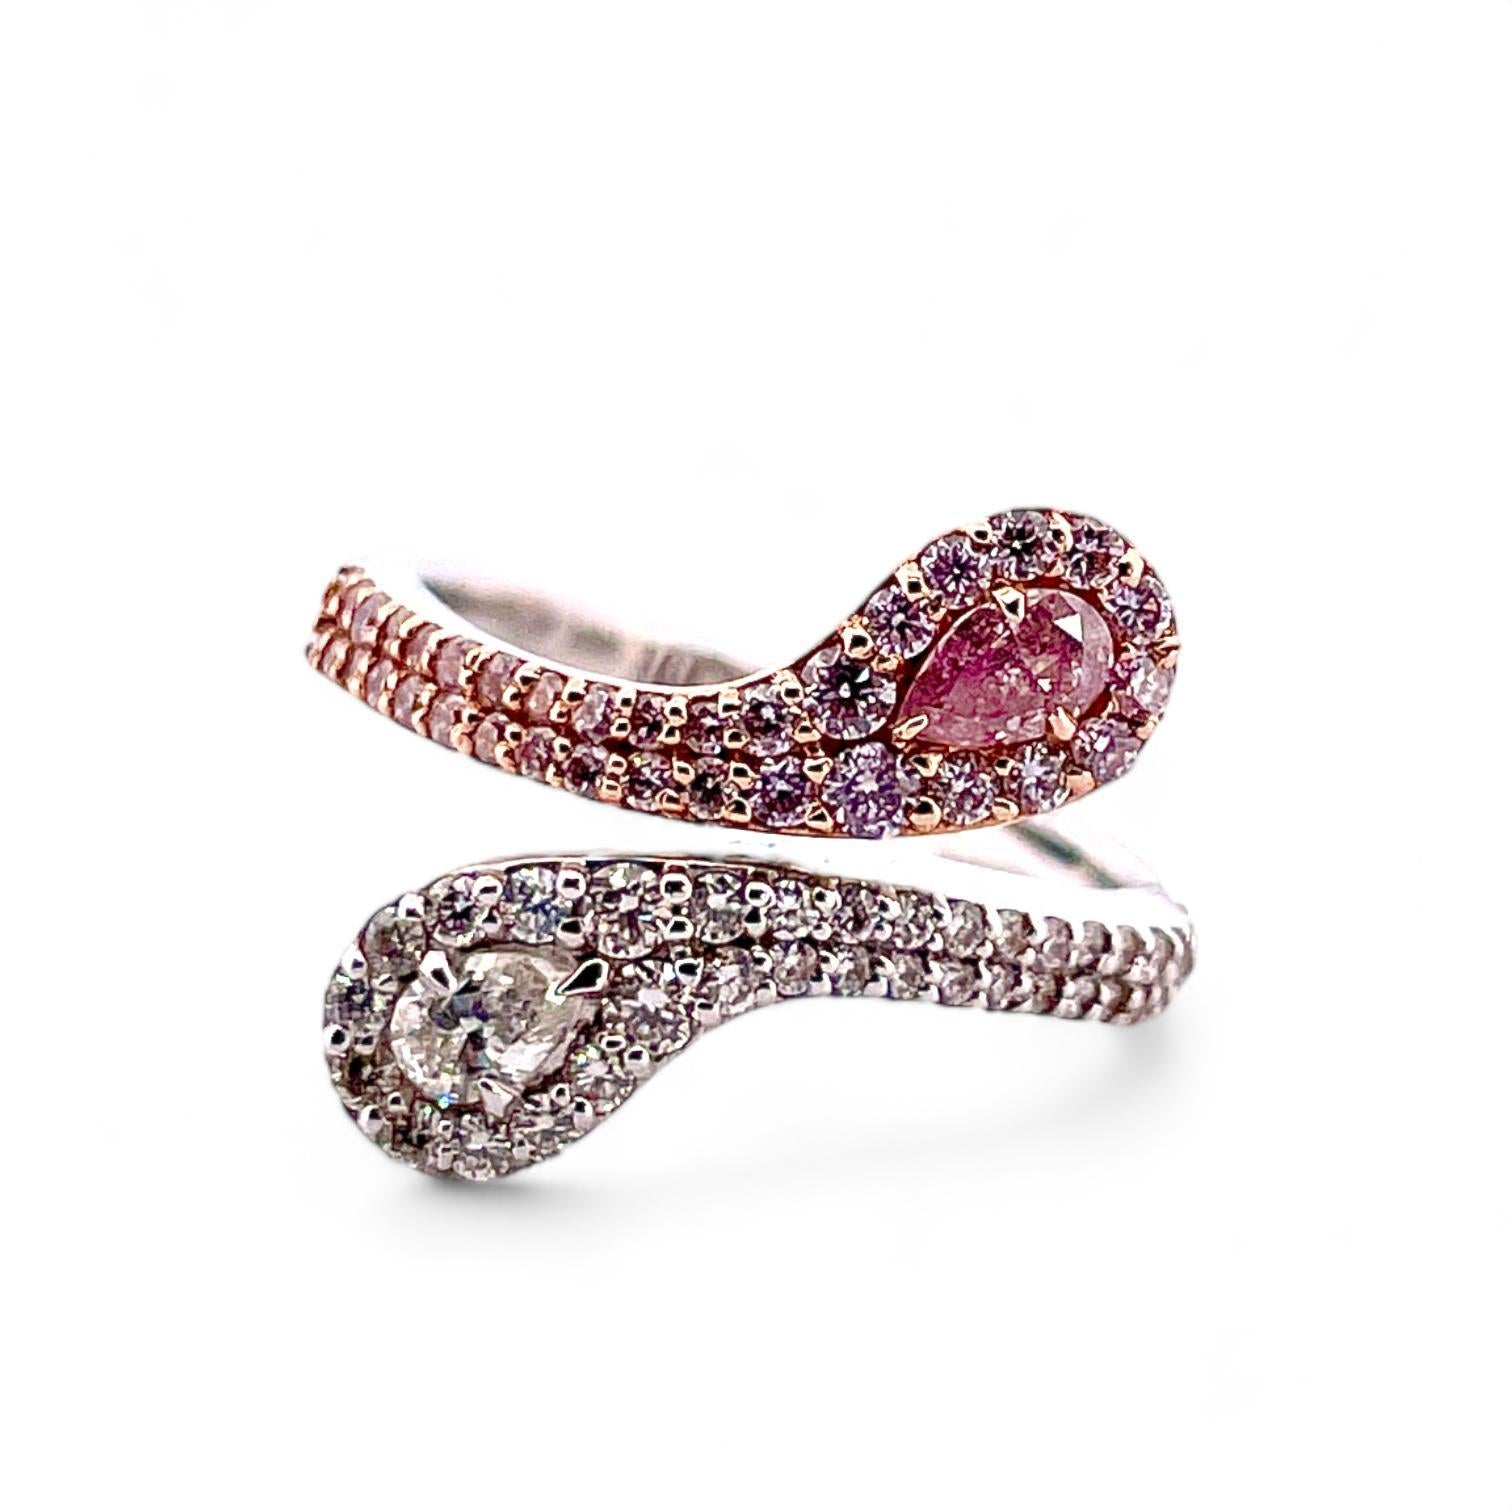 Experience the epitome of elegance with this 18k white gold ring adorned with natural diamonds. A striking fusion of sophistication and modern allure, this ring features a captivating pink and white pear shaped diamonds, radiating warmth and